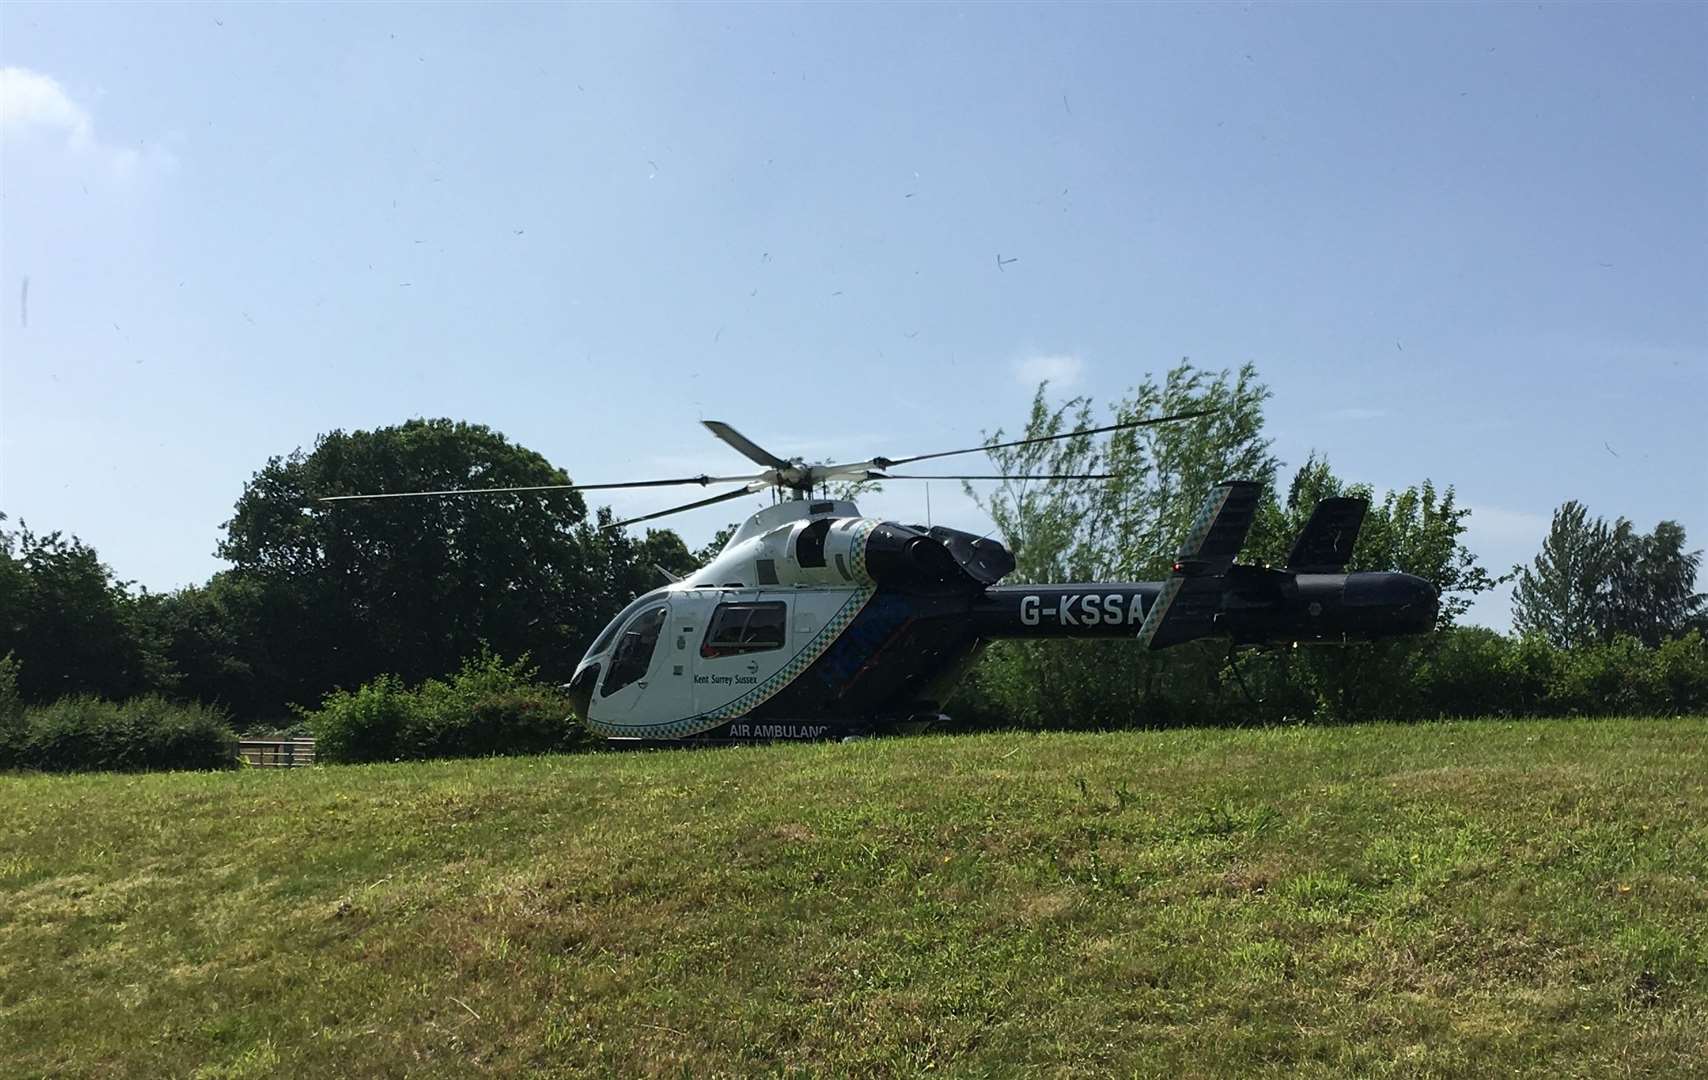 The air ambulance landed in a resident's garden